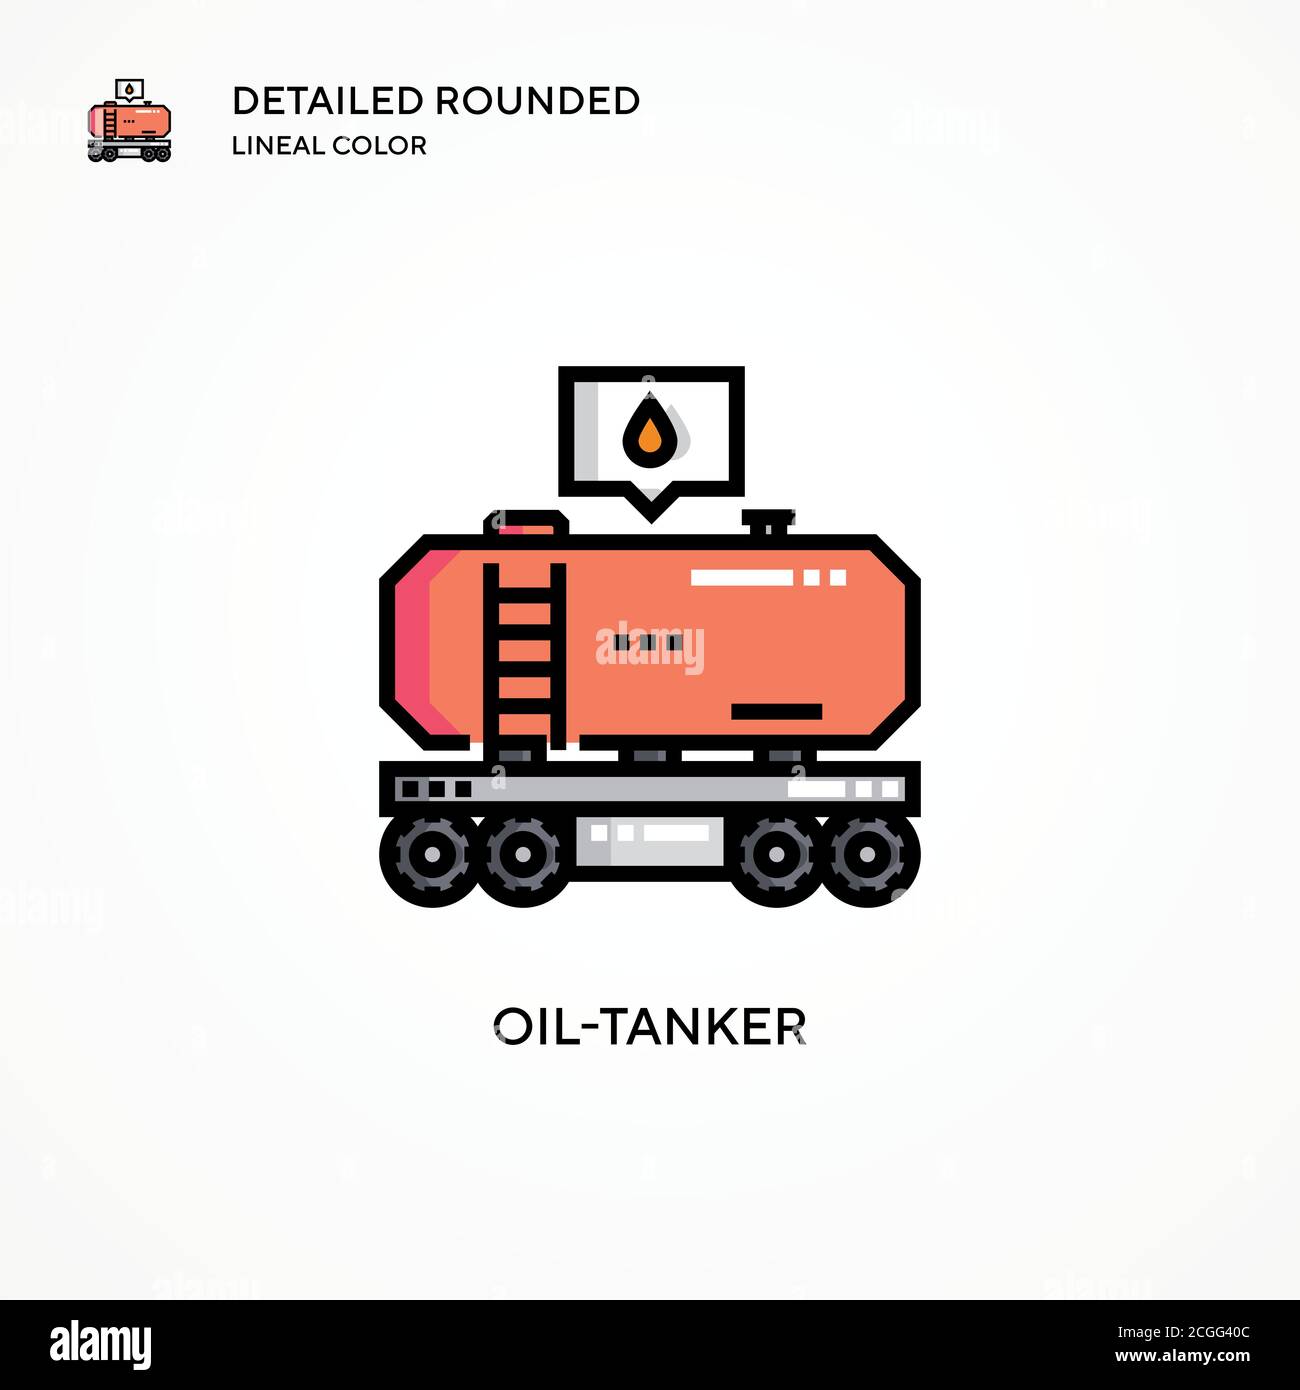 Oil-tanker vector icon. Modern vector illustration concepts. Easy to edit and customize. Stock Vector